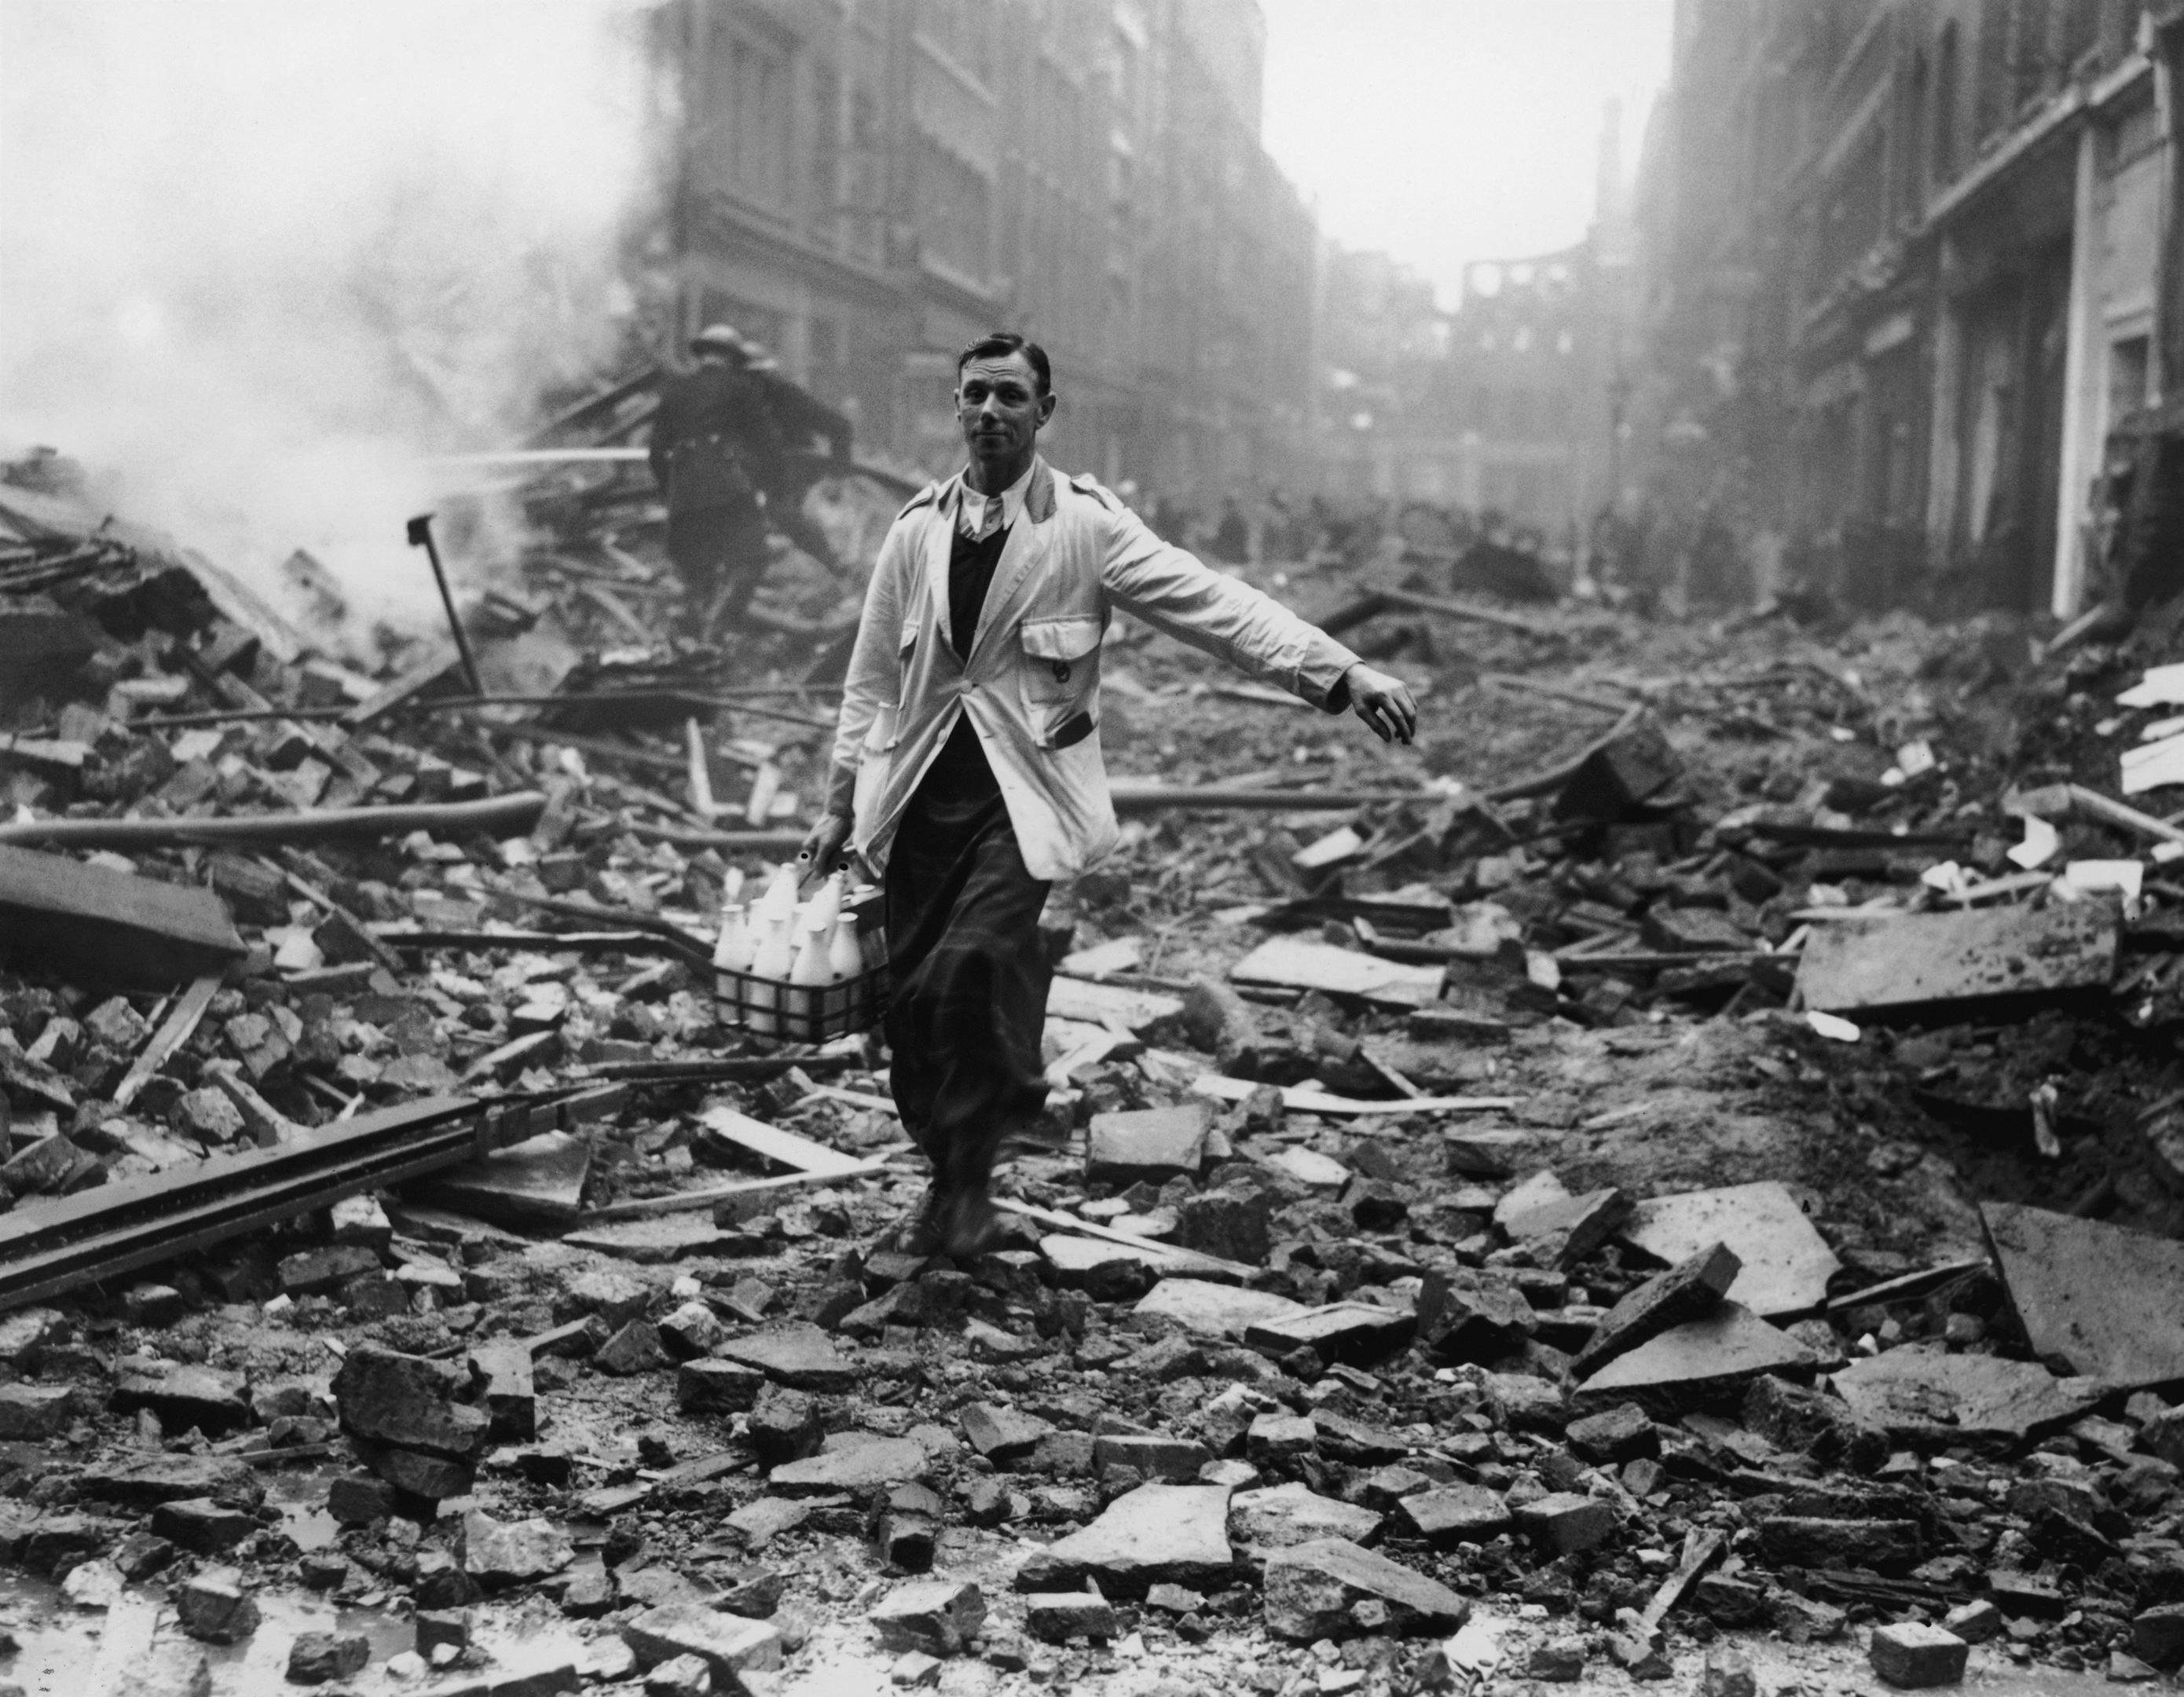 A milkman makes deliveries after a German bomb raid (Fred Morley/Getty Images)